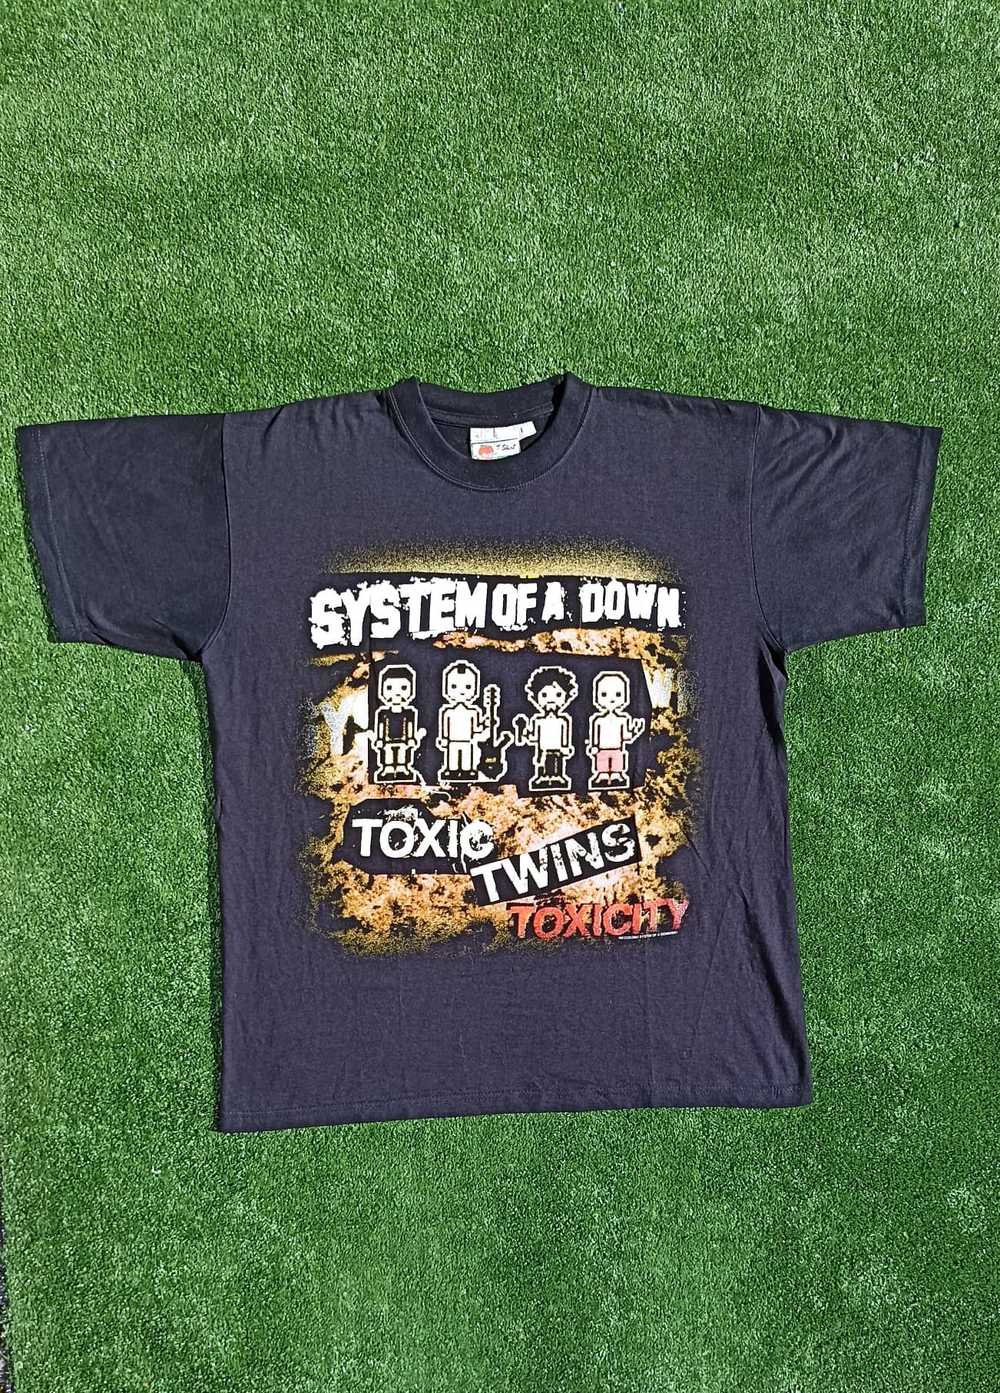 System of a down toxic twins 2001 vintage tshirt - image 1